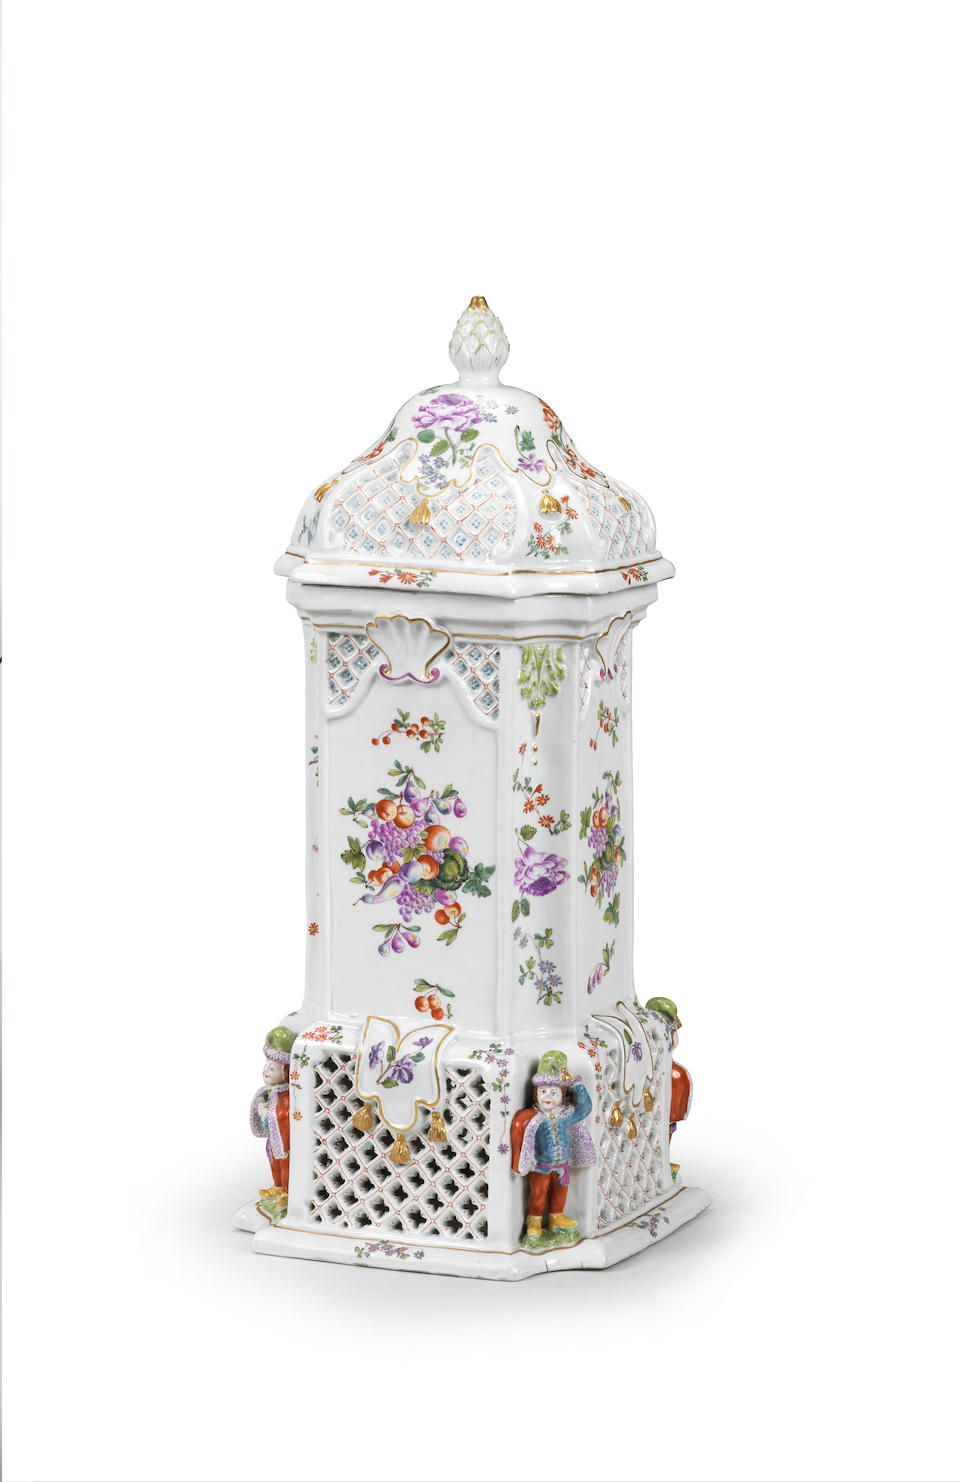 A Du Paquier food warmer and cover, circa 1730